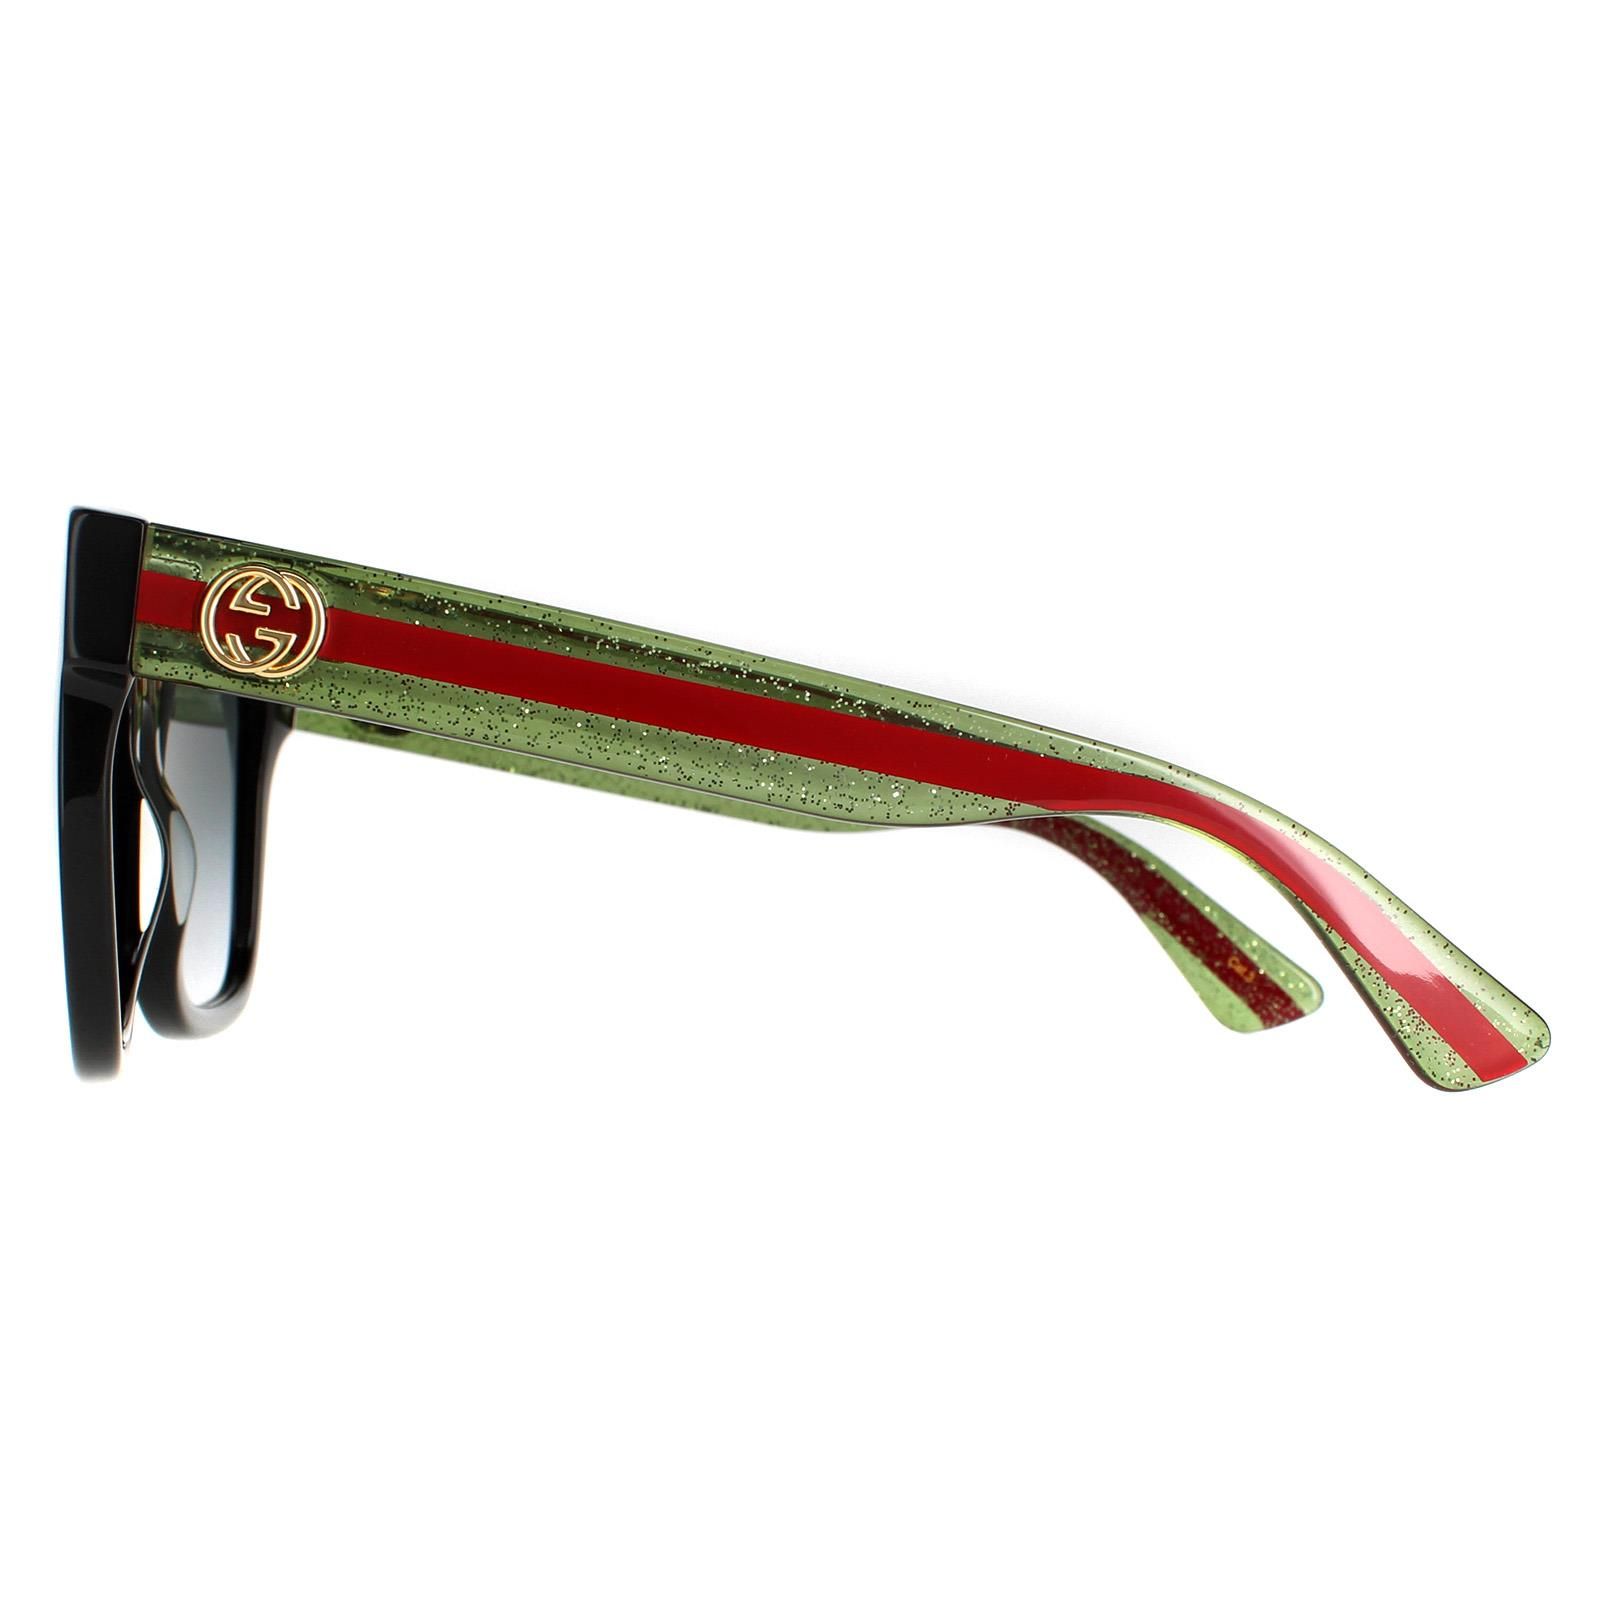 Gucci Square Womens Black With Green and Red Glitter Grey Gradient GG0034SN Sunglasses are a glamorous and oversized square shape frame. The thick acetate frame is lightweight and comfortable with Gucci's iconic GG metal logo at each of the temples. An exquisite style that will always stay on trend!